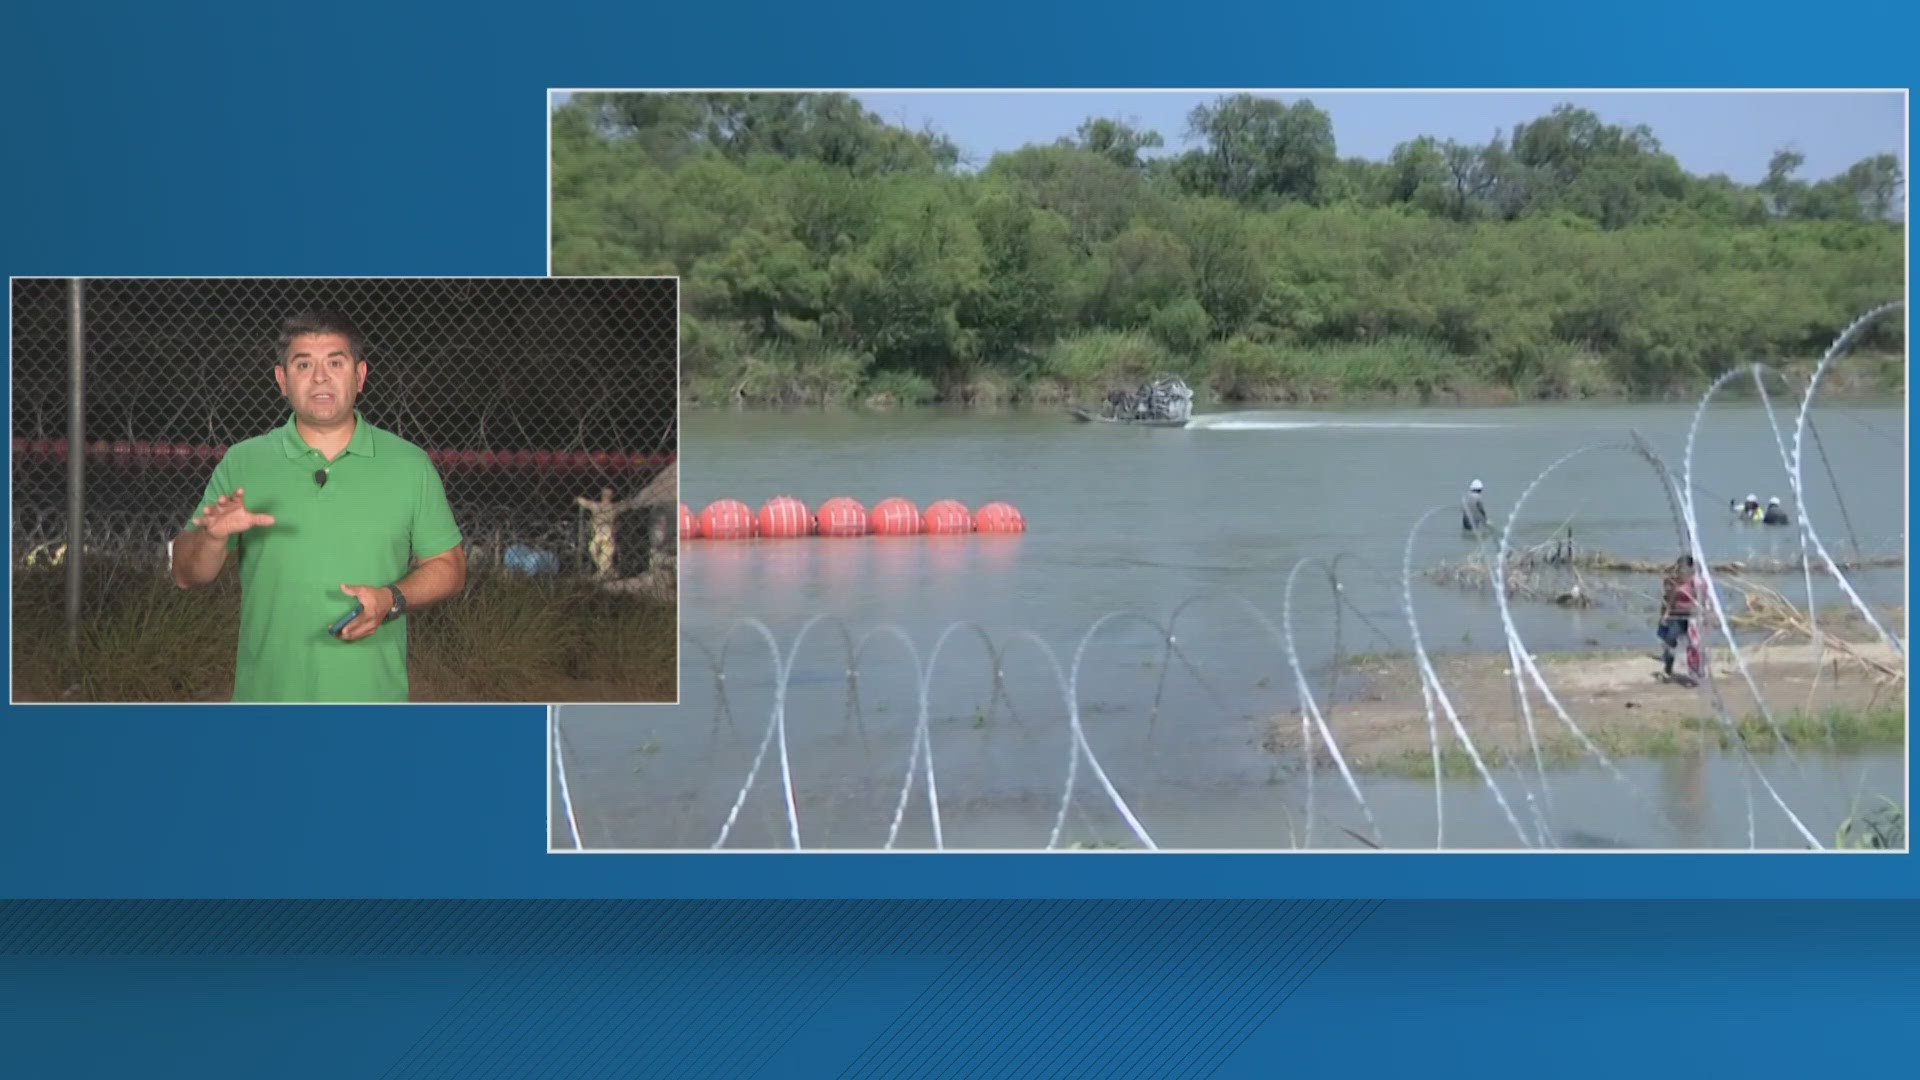 CBS News' Oma Villafranca was live from Eagle Pass, Texas with the latest on the buoys along Rio Grande and the safety of migrants crossing.